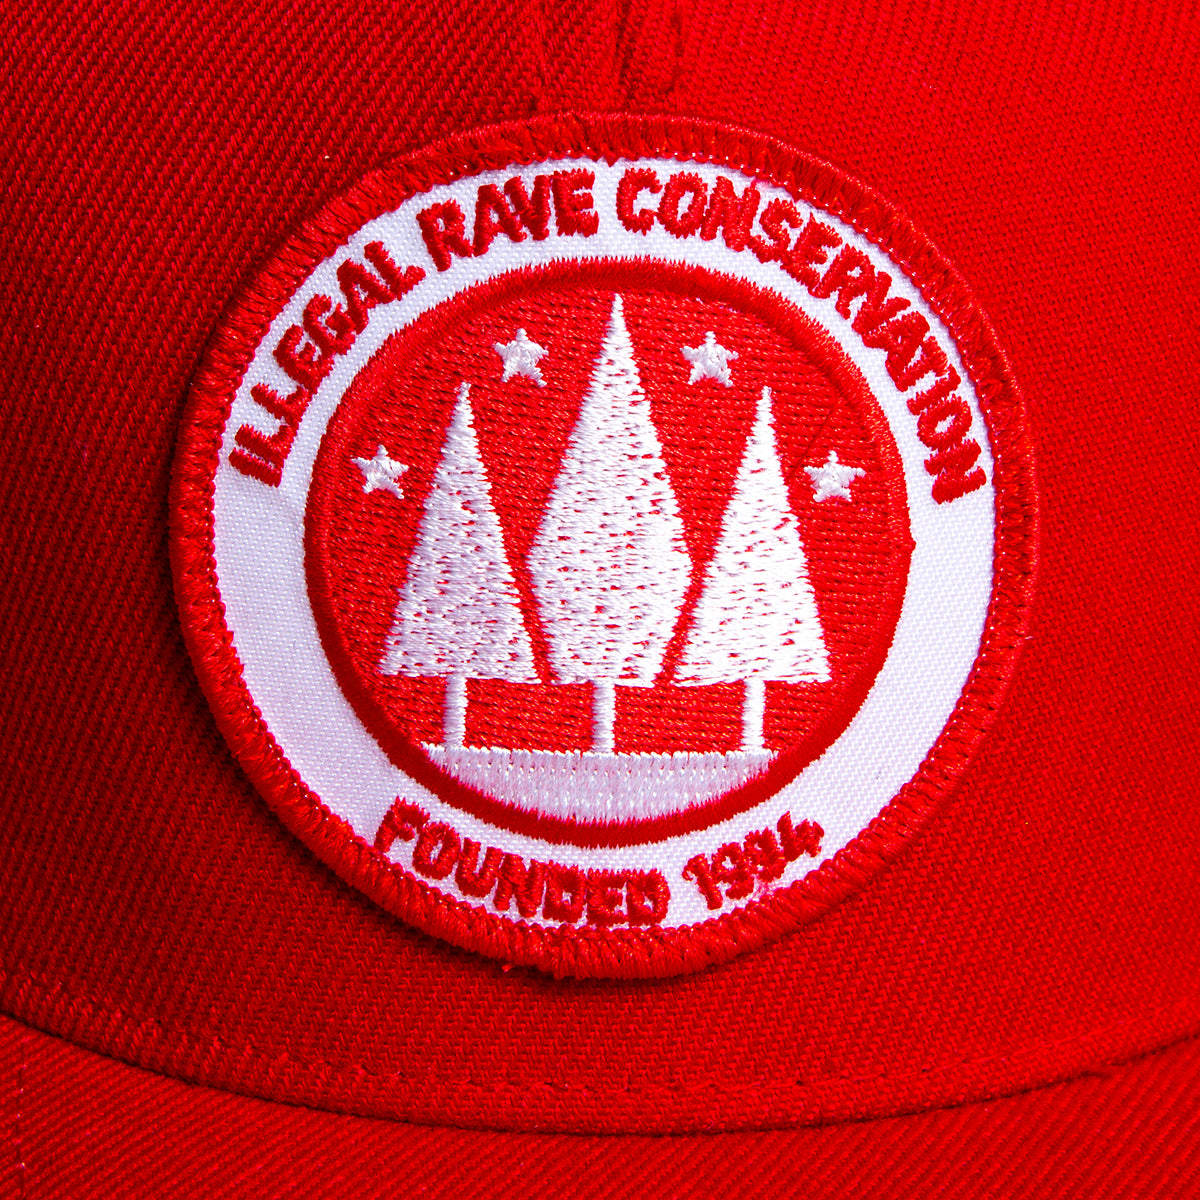 Ilegal Rave - Snapback - Full Red - Wasted Heroes